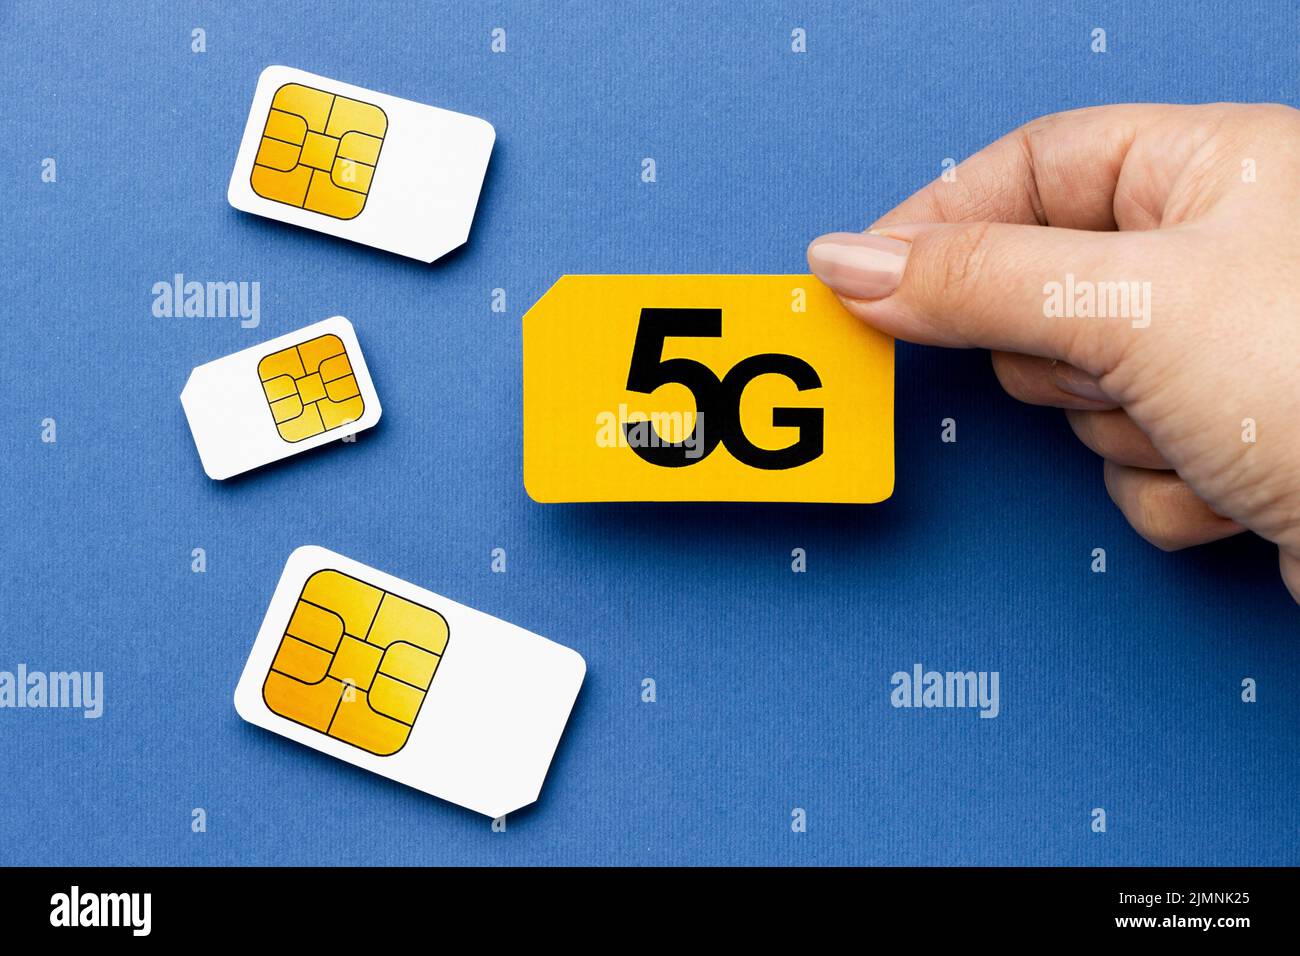 Top view hand holding 5g sim card Stock Photo